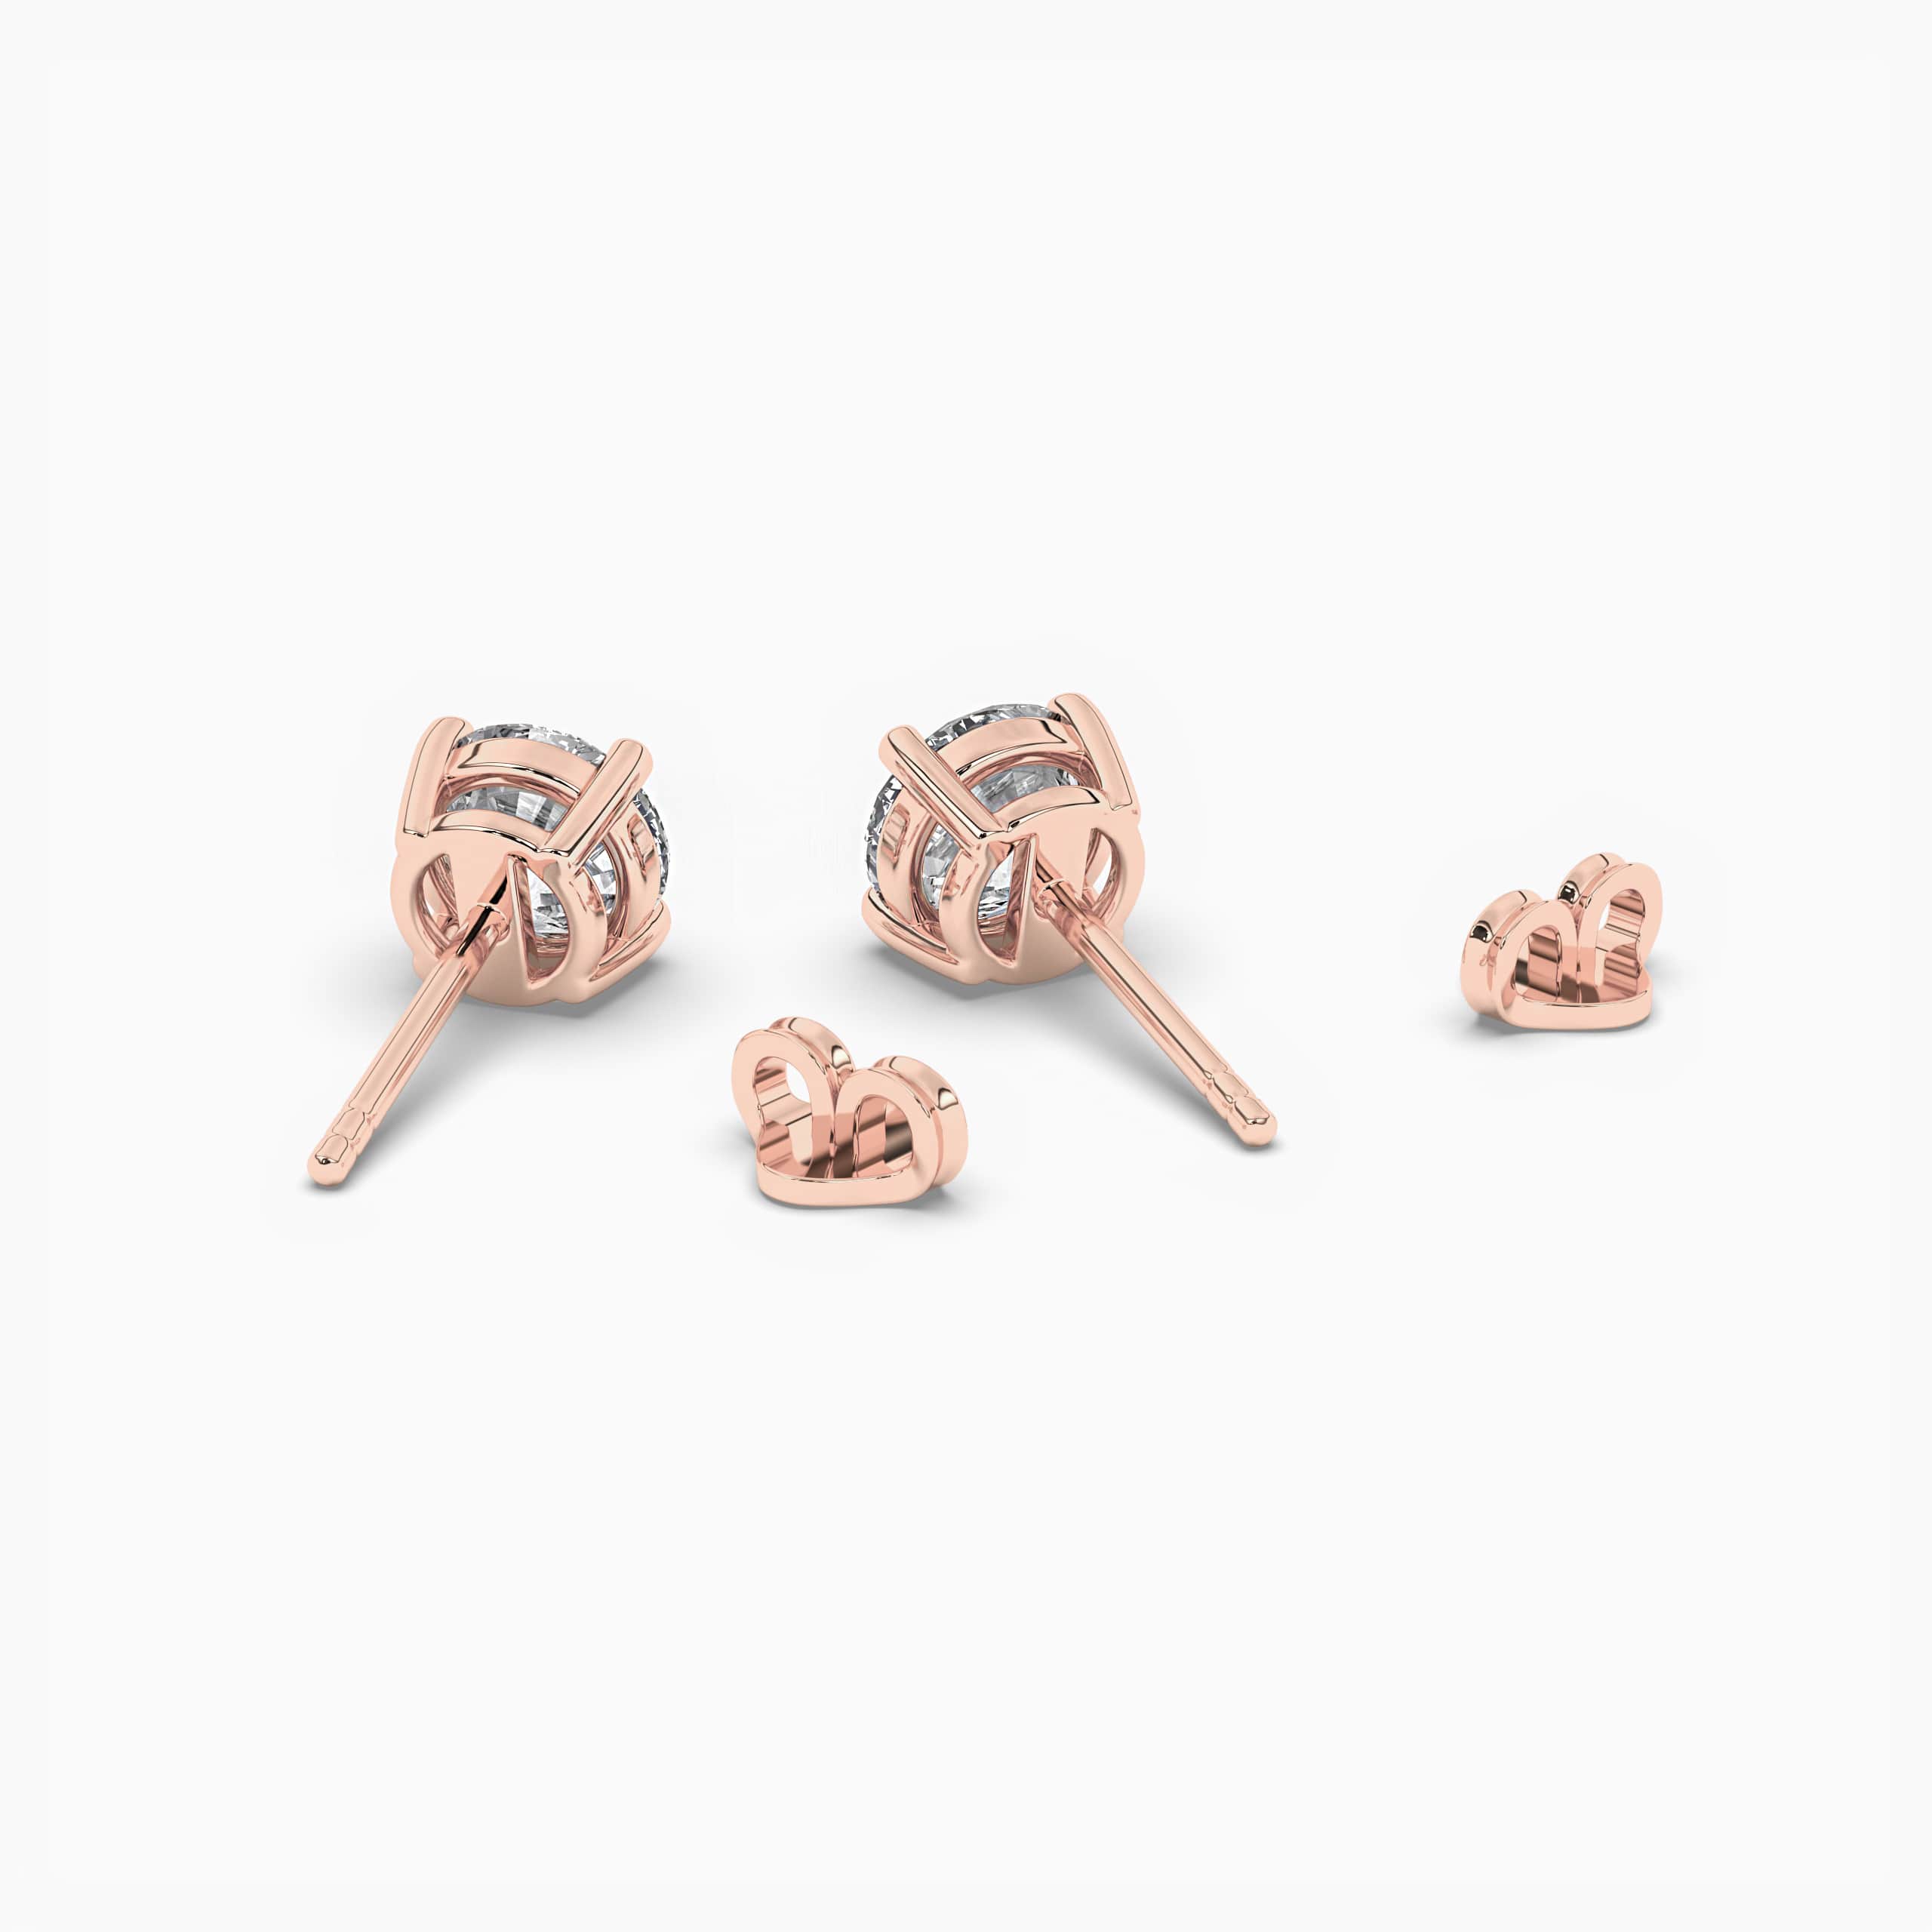 Round Cut Diamond Solitaire Studs Earrings Rose Gold